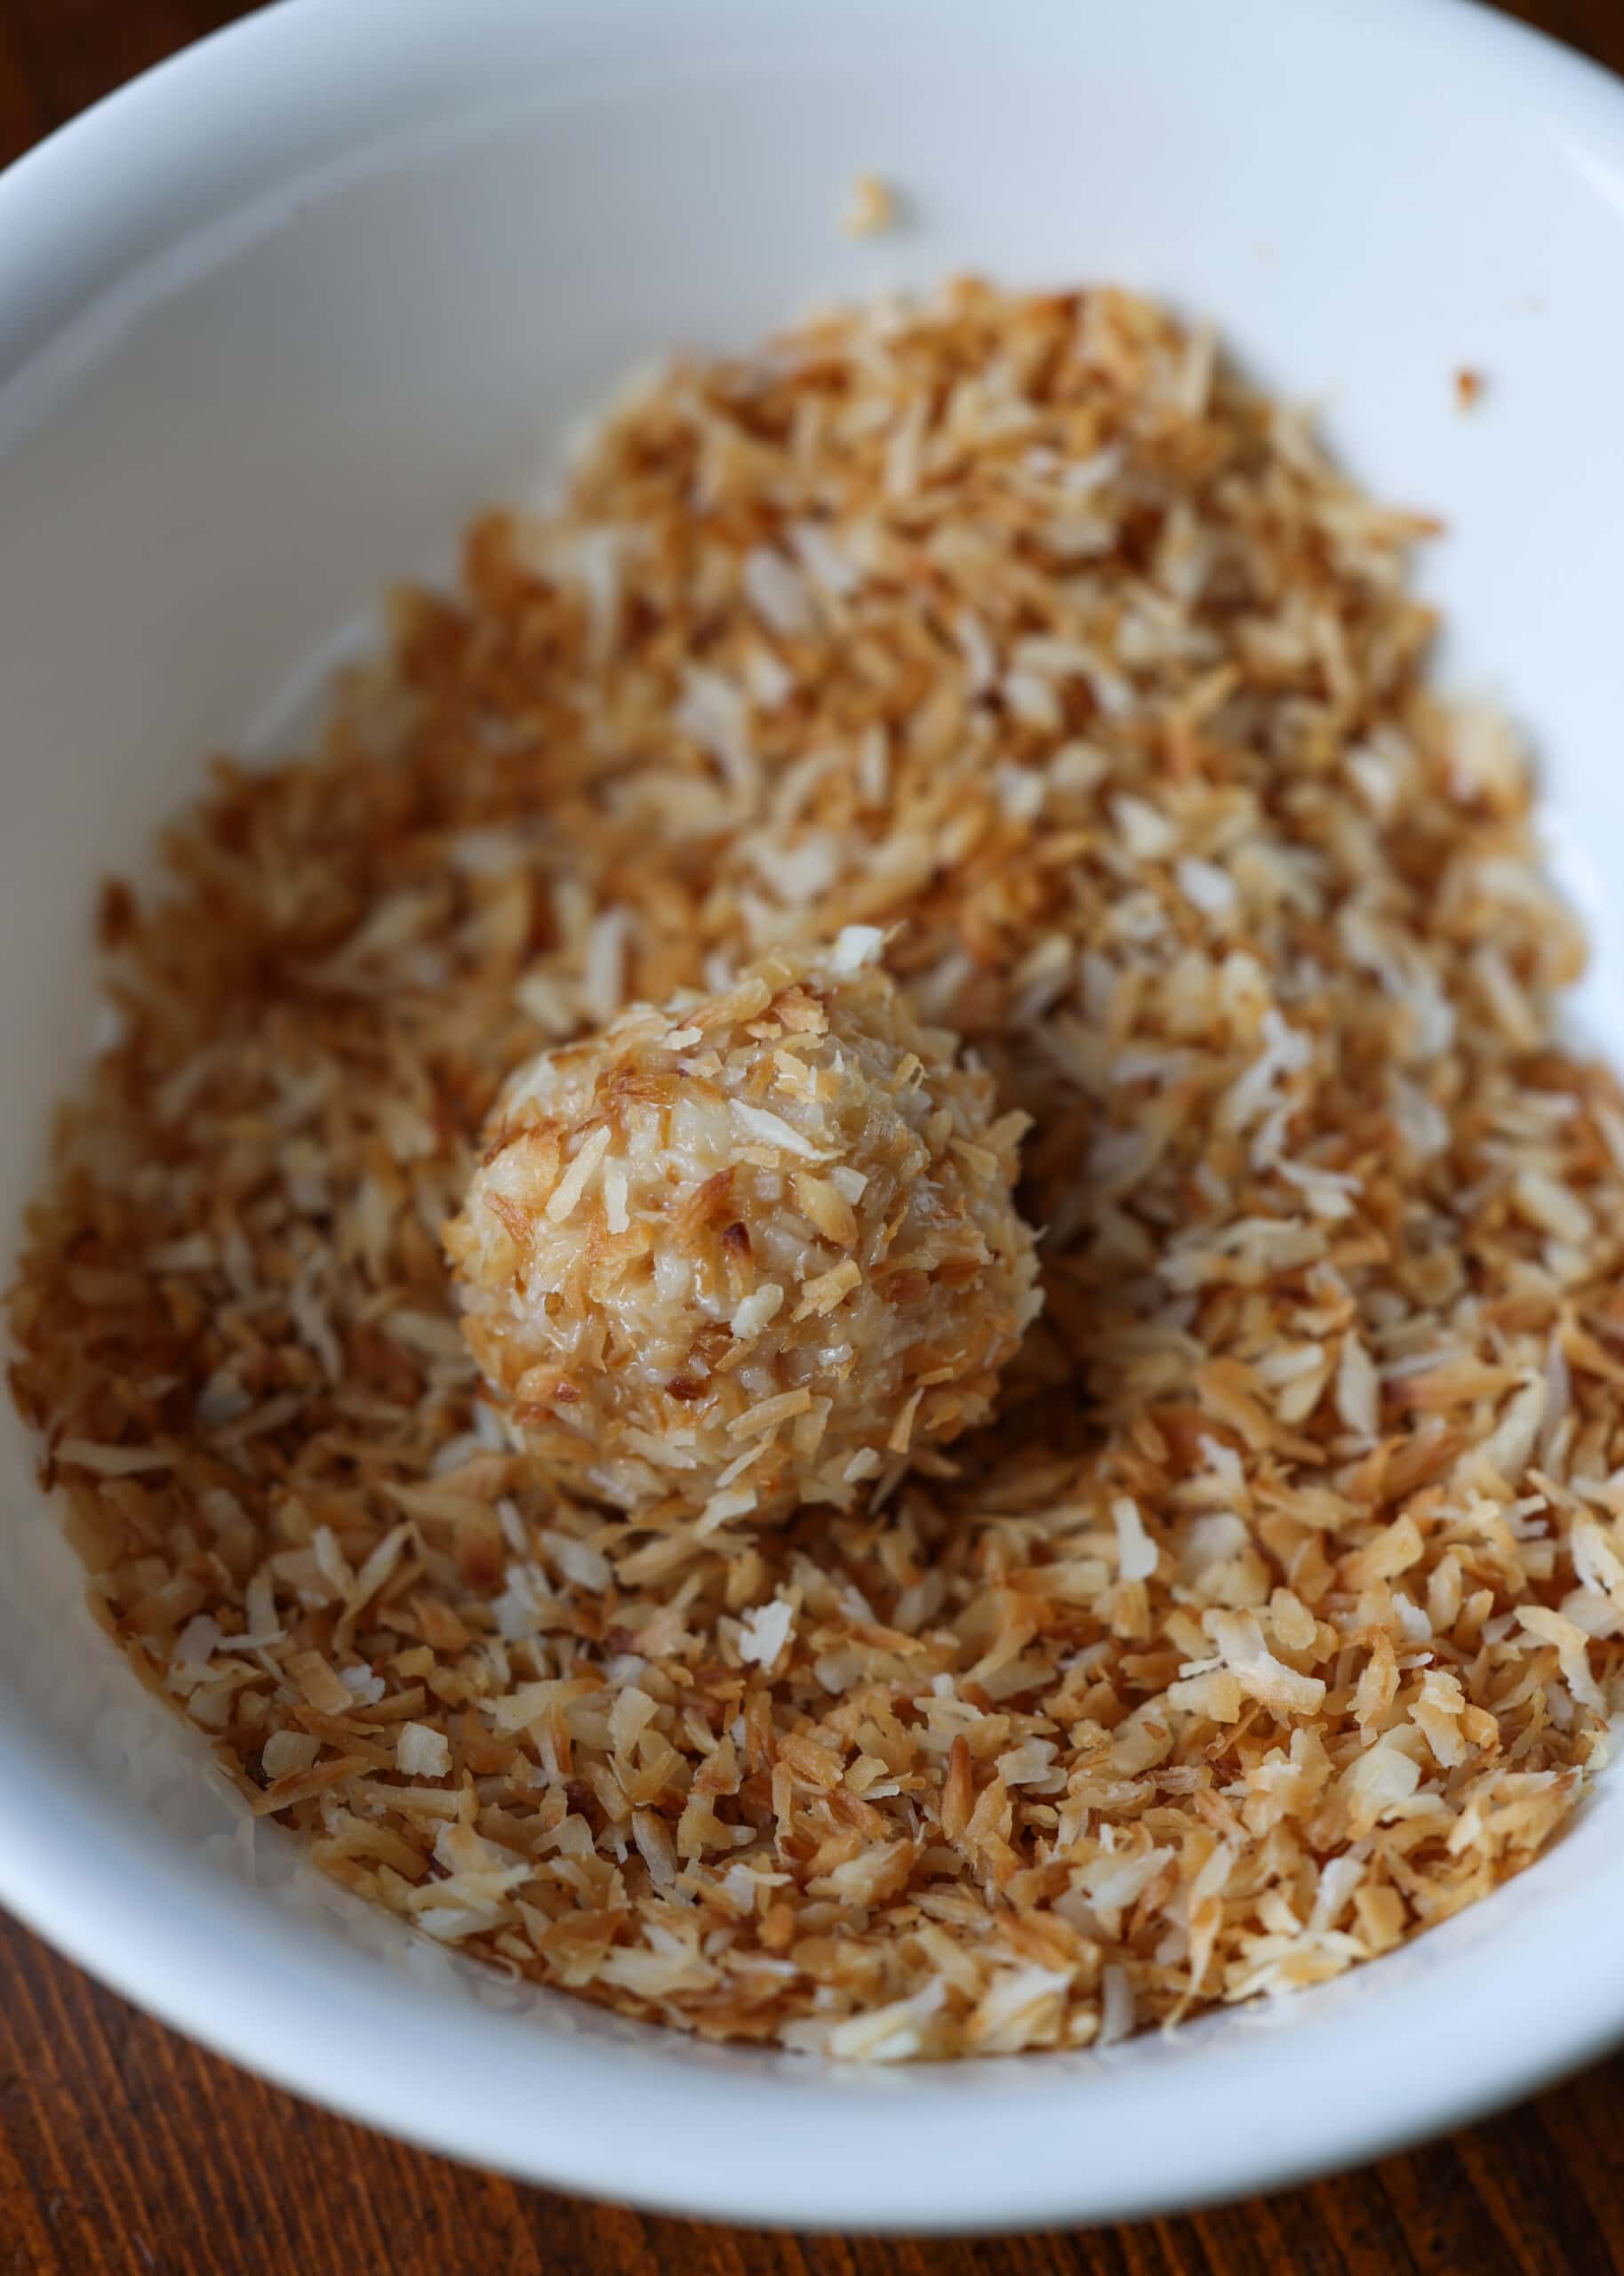 rolling coconut ball in toasted desiccated coconut